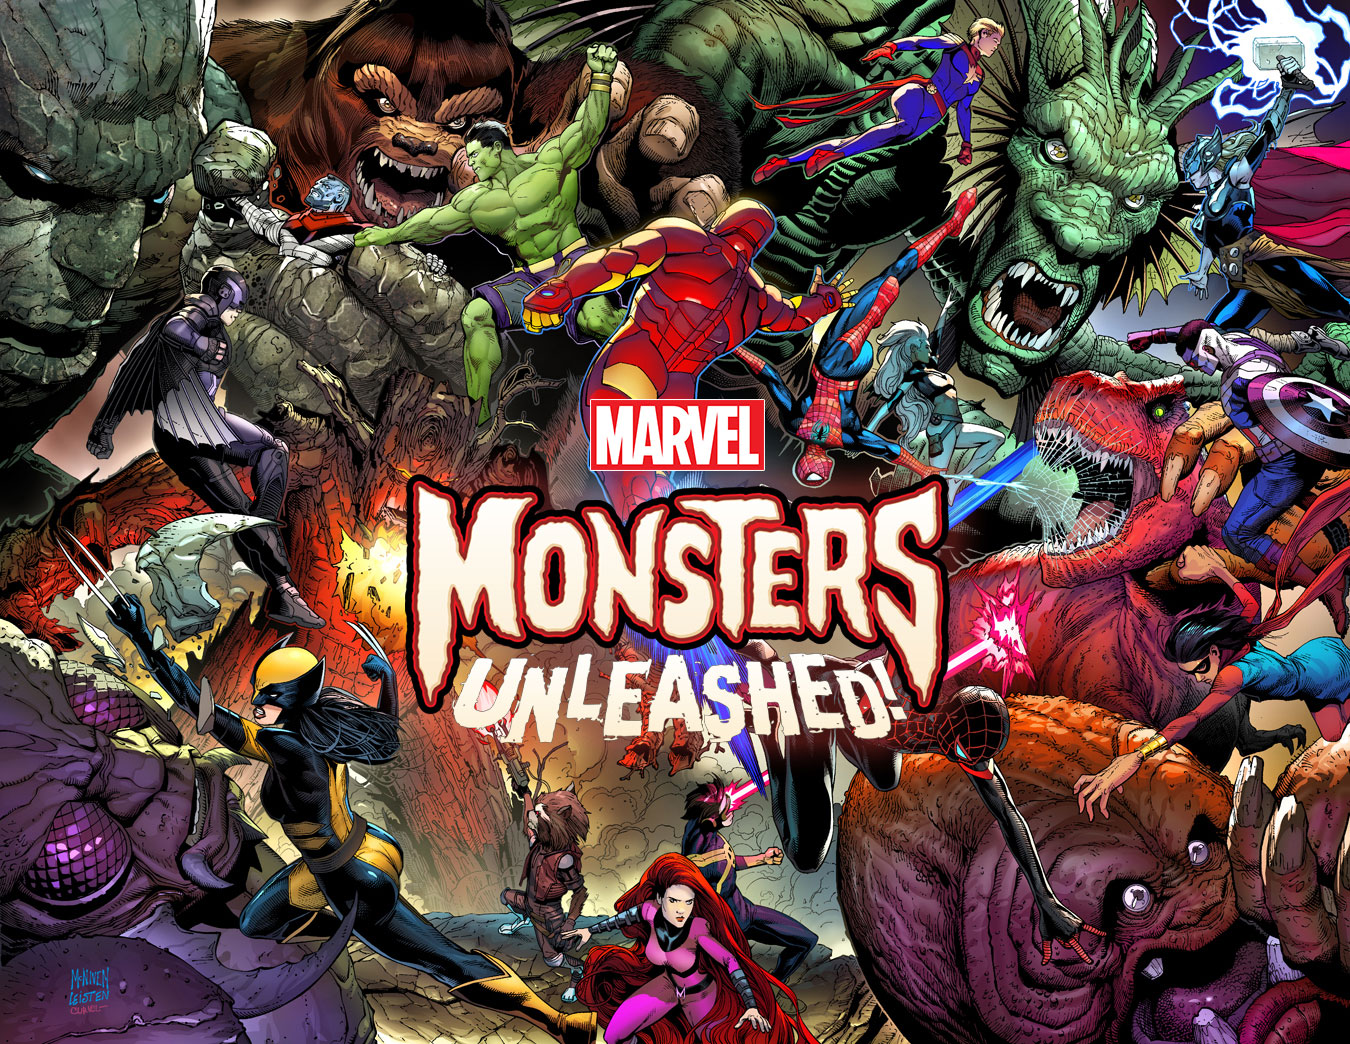 [VIDEO] Monsters Unleashed "Monster-Size" HC will destroy your empty space